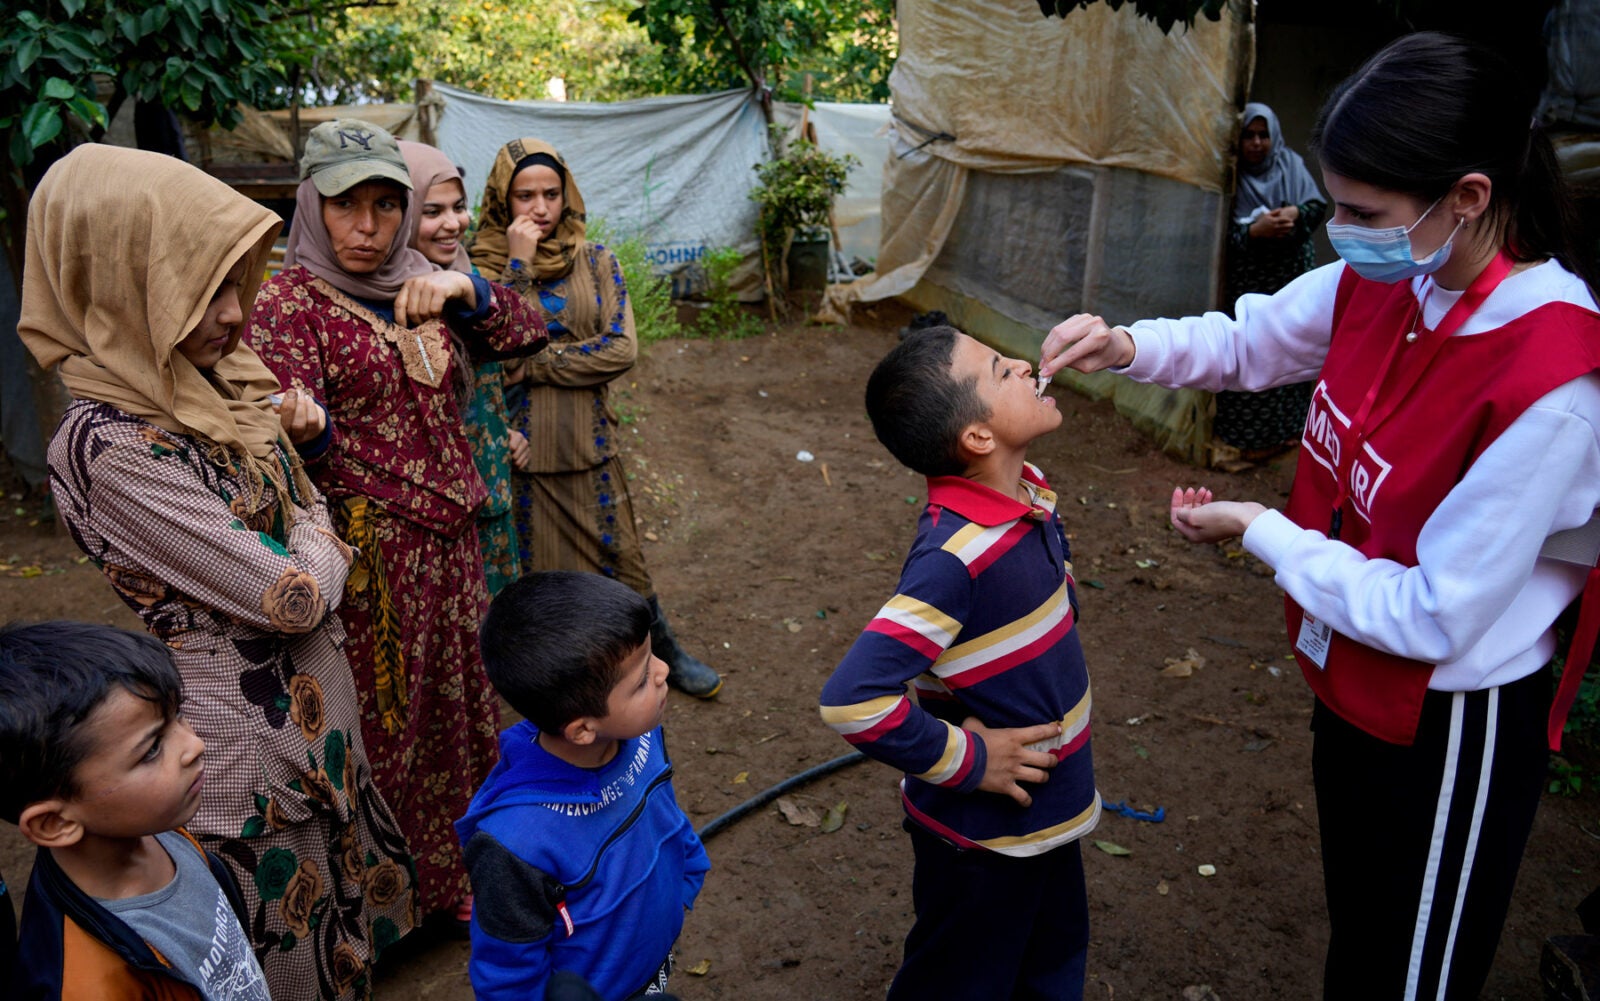 A Syrian child wearing a striped shirt receives an oral Cholera vaccine from a female aid worker in North Lebanon. Two other young boys look on as well as a group of four Syrian women.